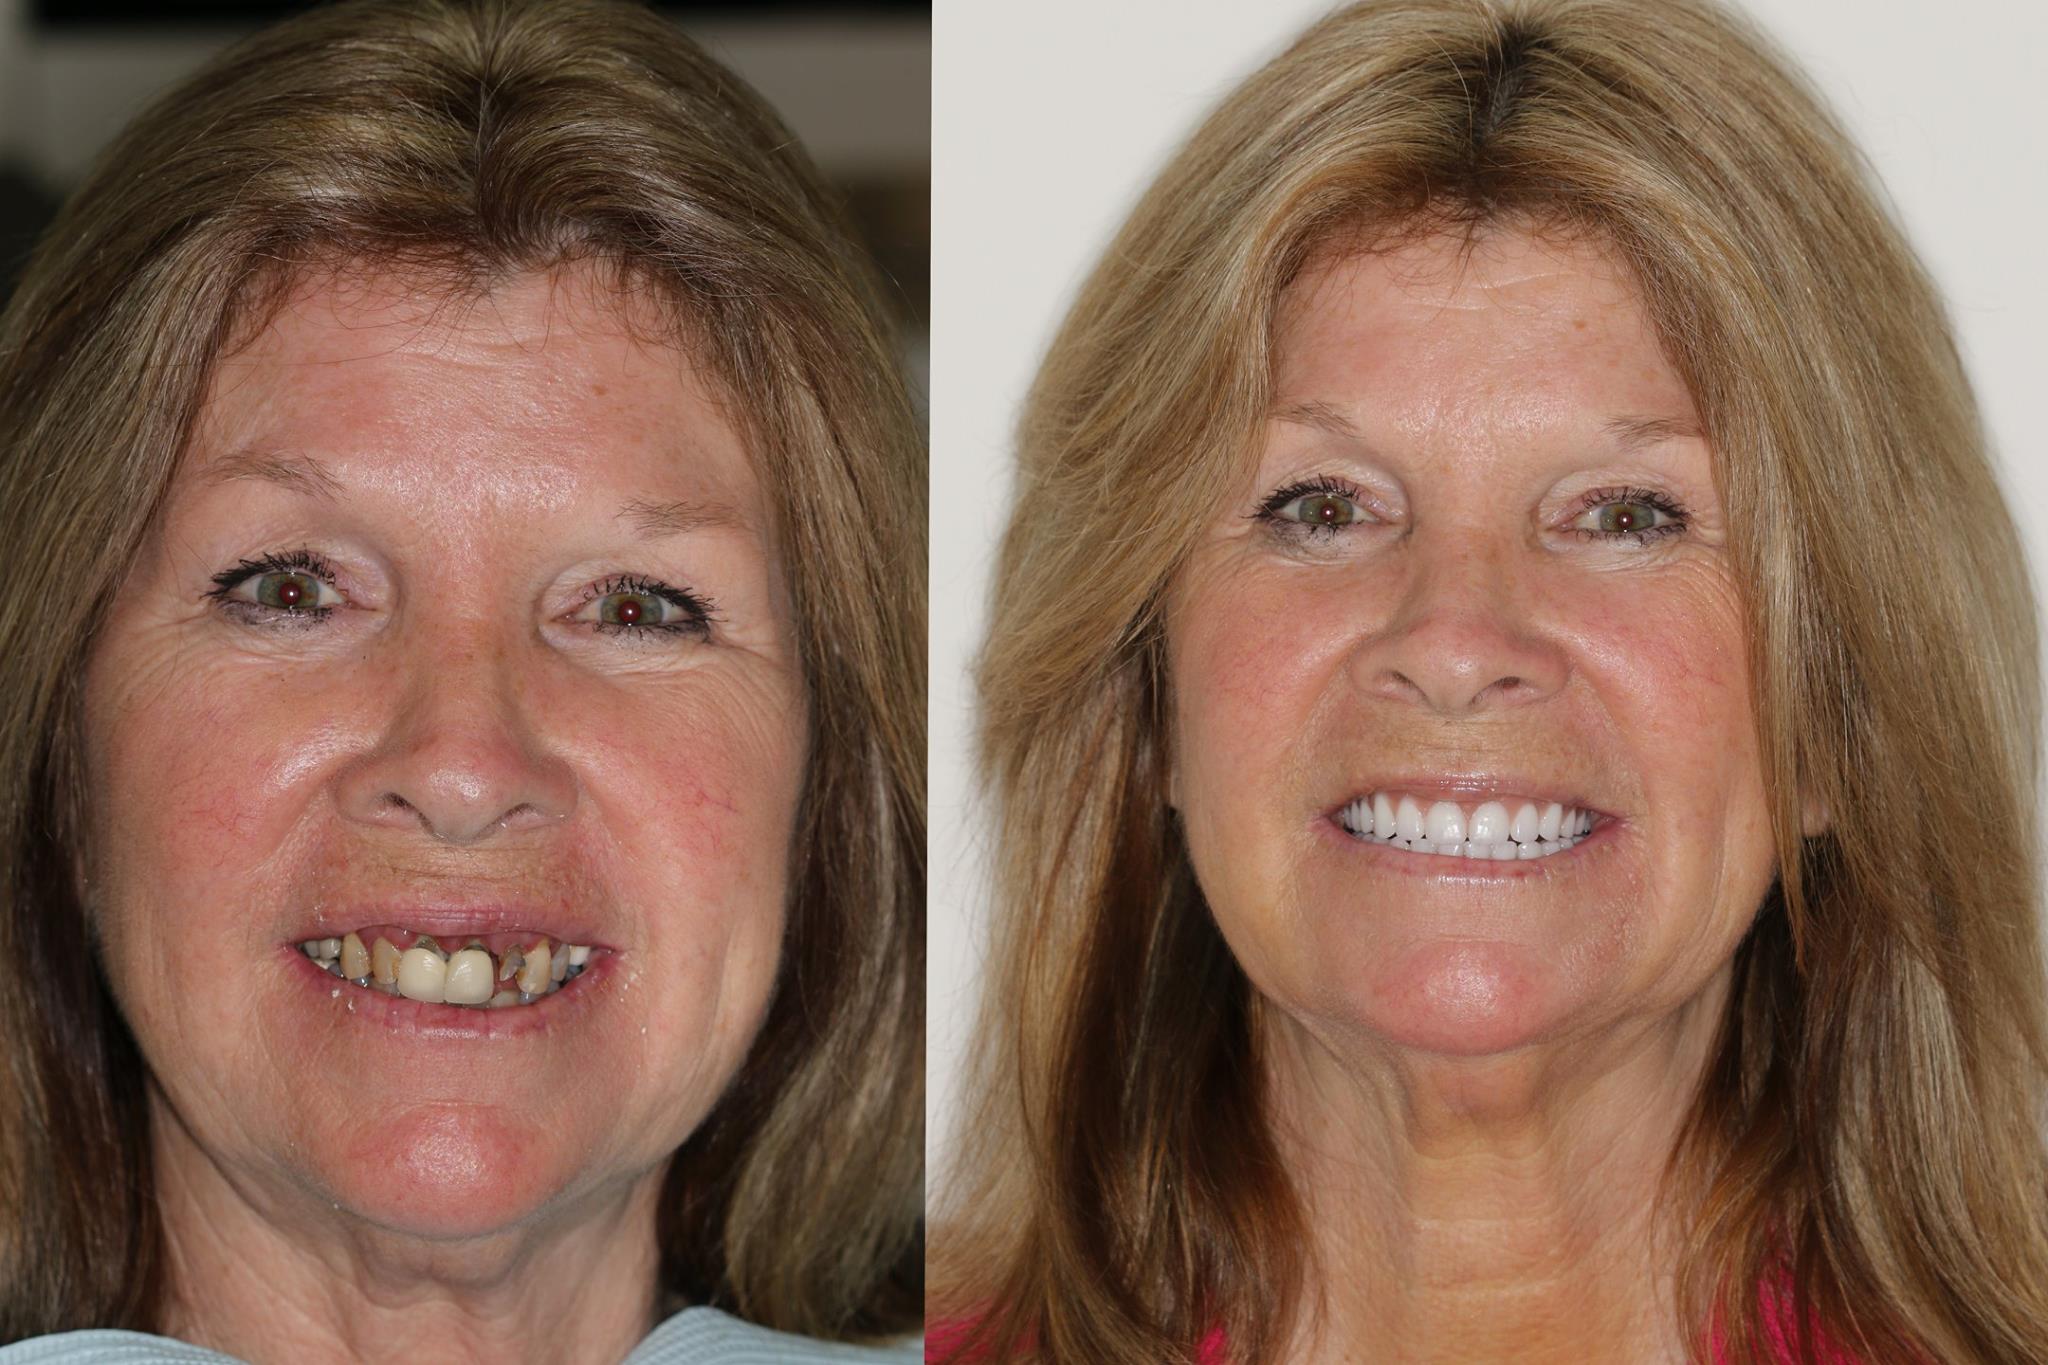 affordable dentures and aspen dental before and after with dentures